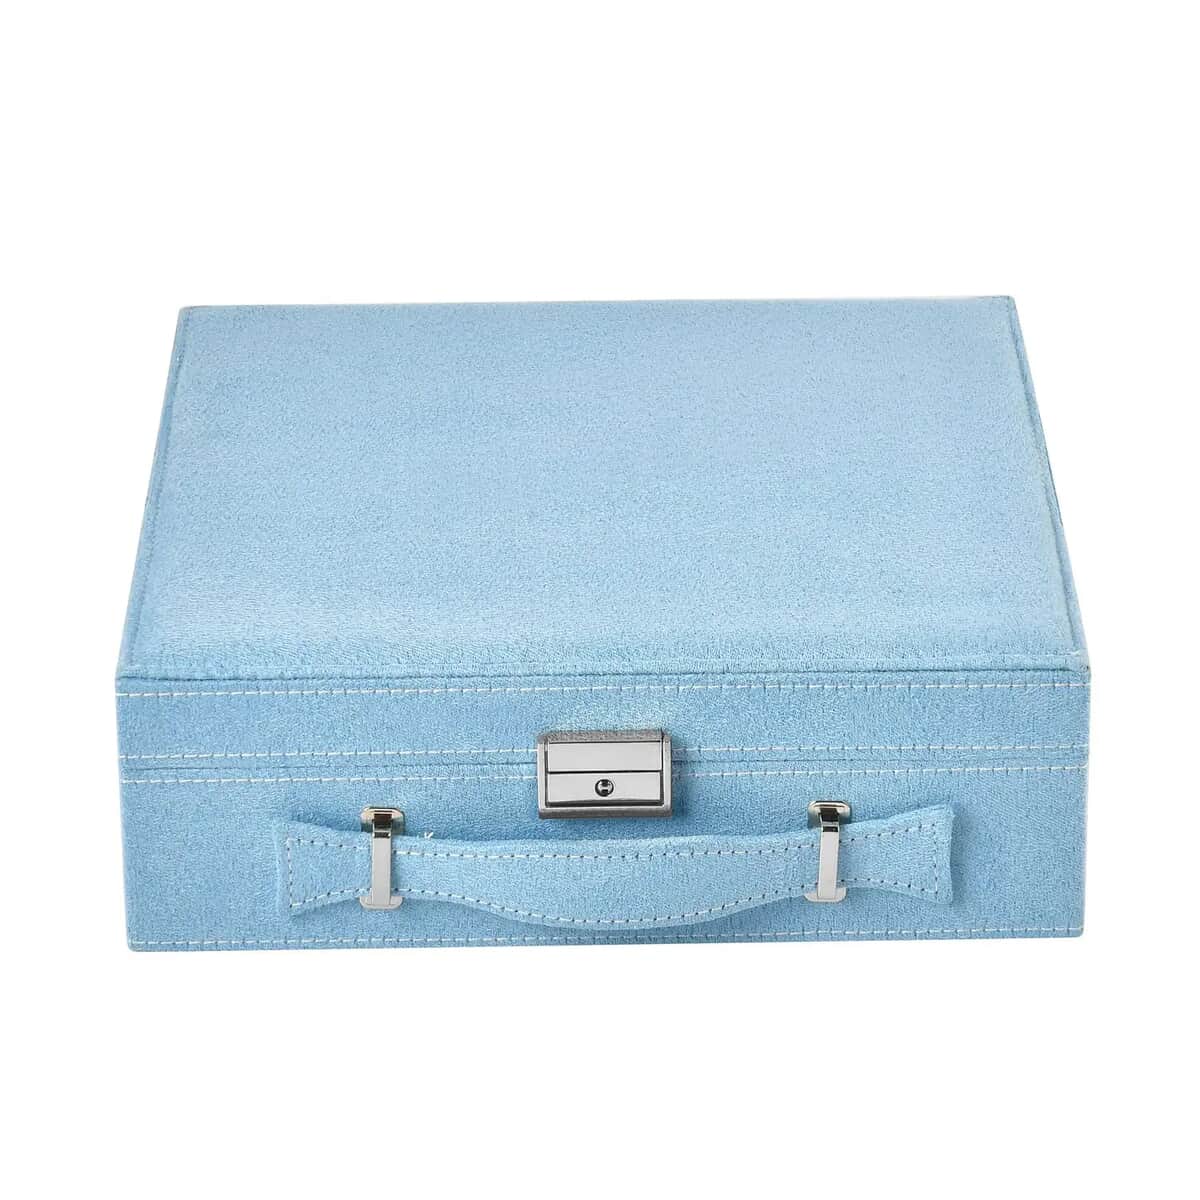 Buy Turquoise Faux Velvet Briefcase Style 2-tier Jewelry Box, Scratch  resistant and Anti-Tarnish Jewelry Storage Box, Anti Tarnish Jewelry Case, Jewelry  Organizer (Approx 60 Rings, etc.) at ShopLC.